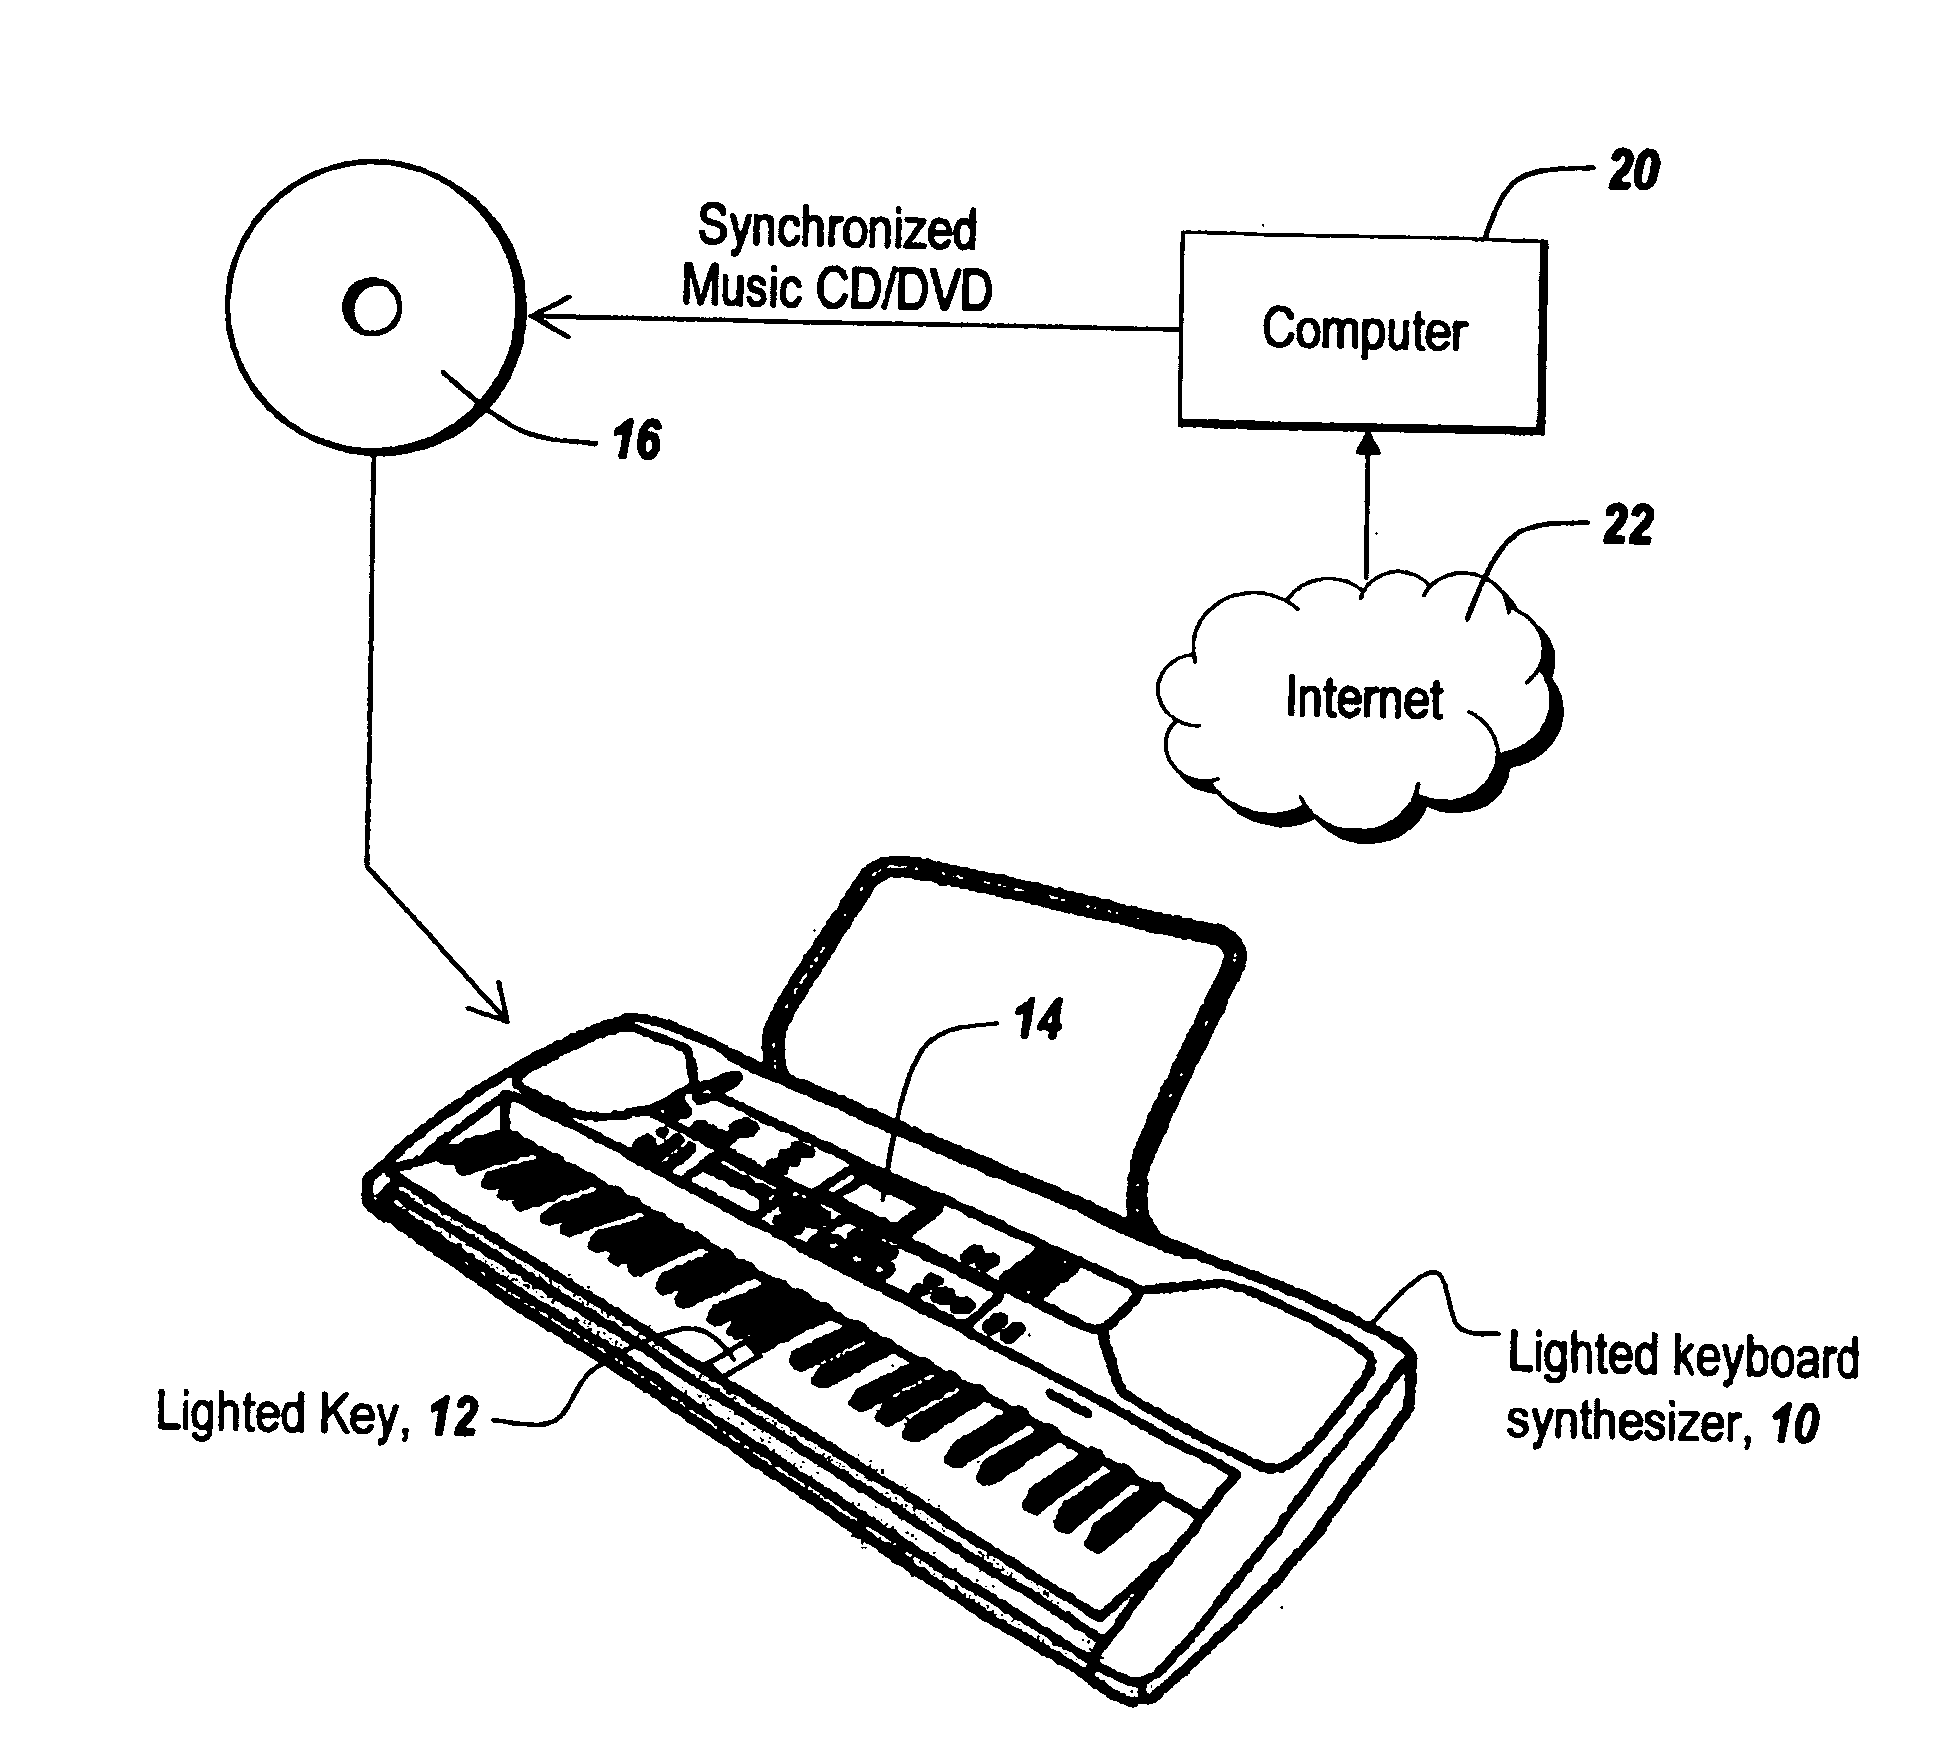 Synthesized music delivery system